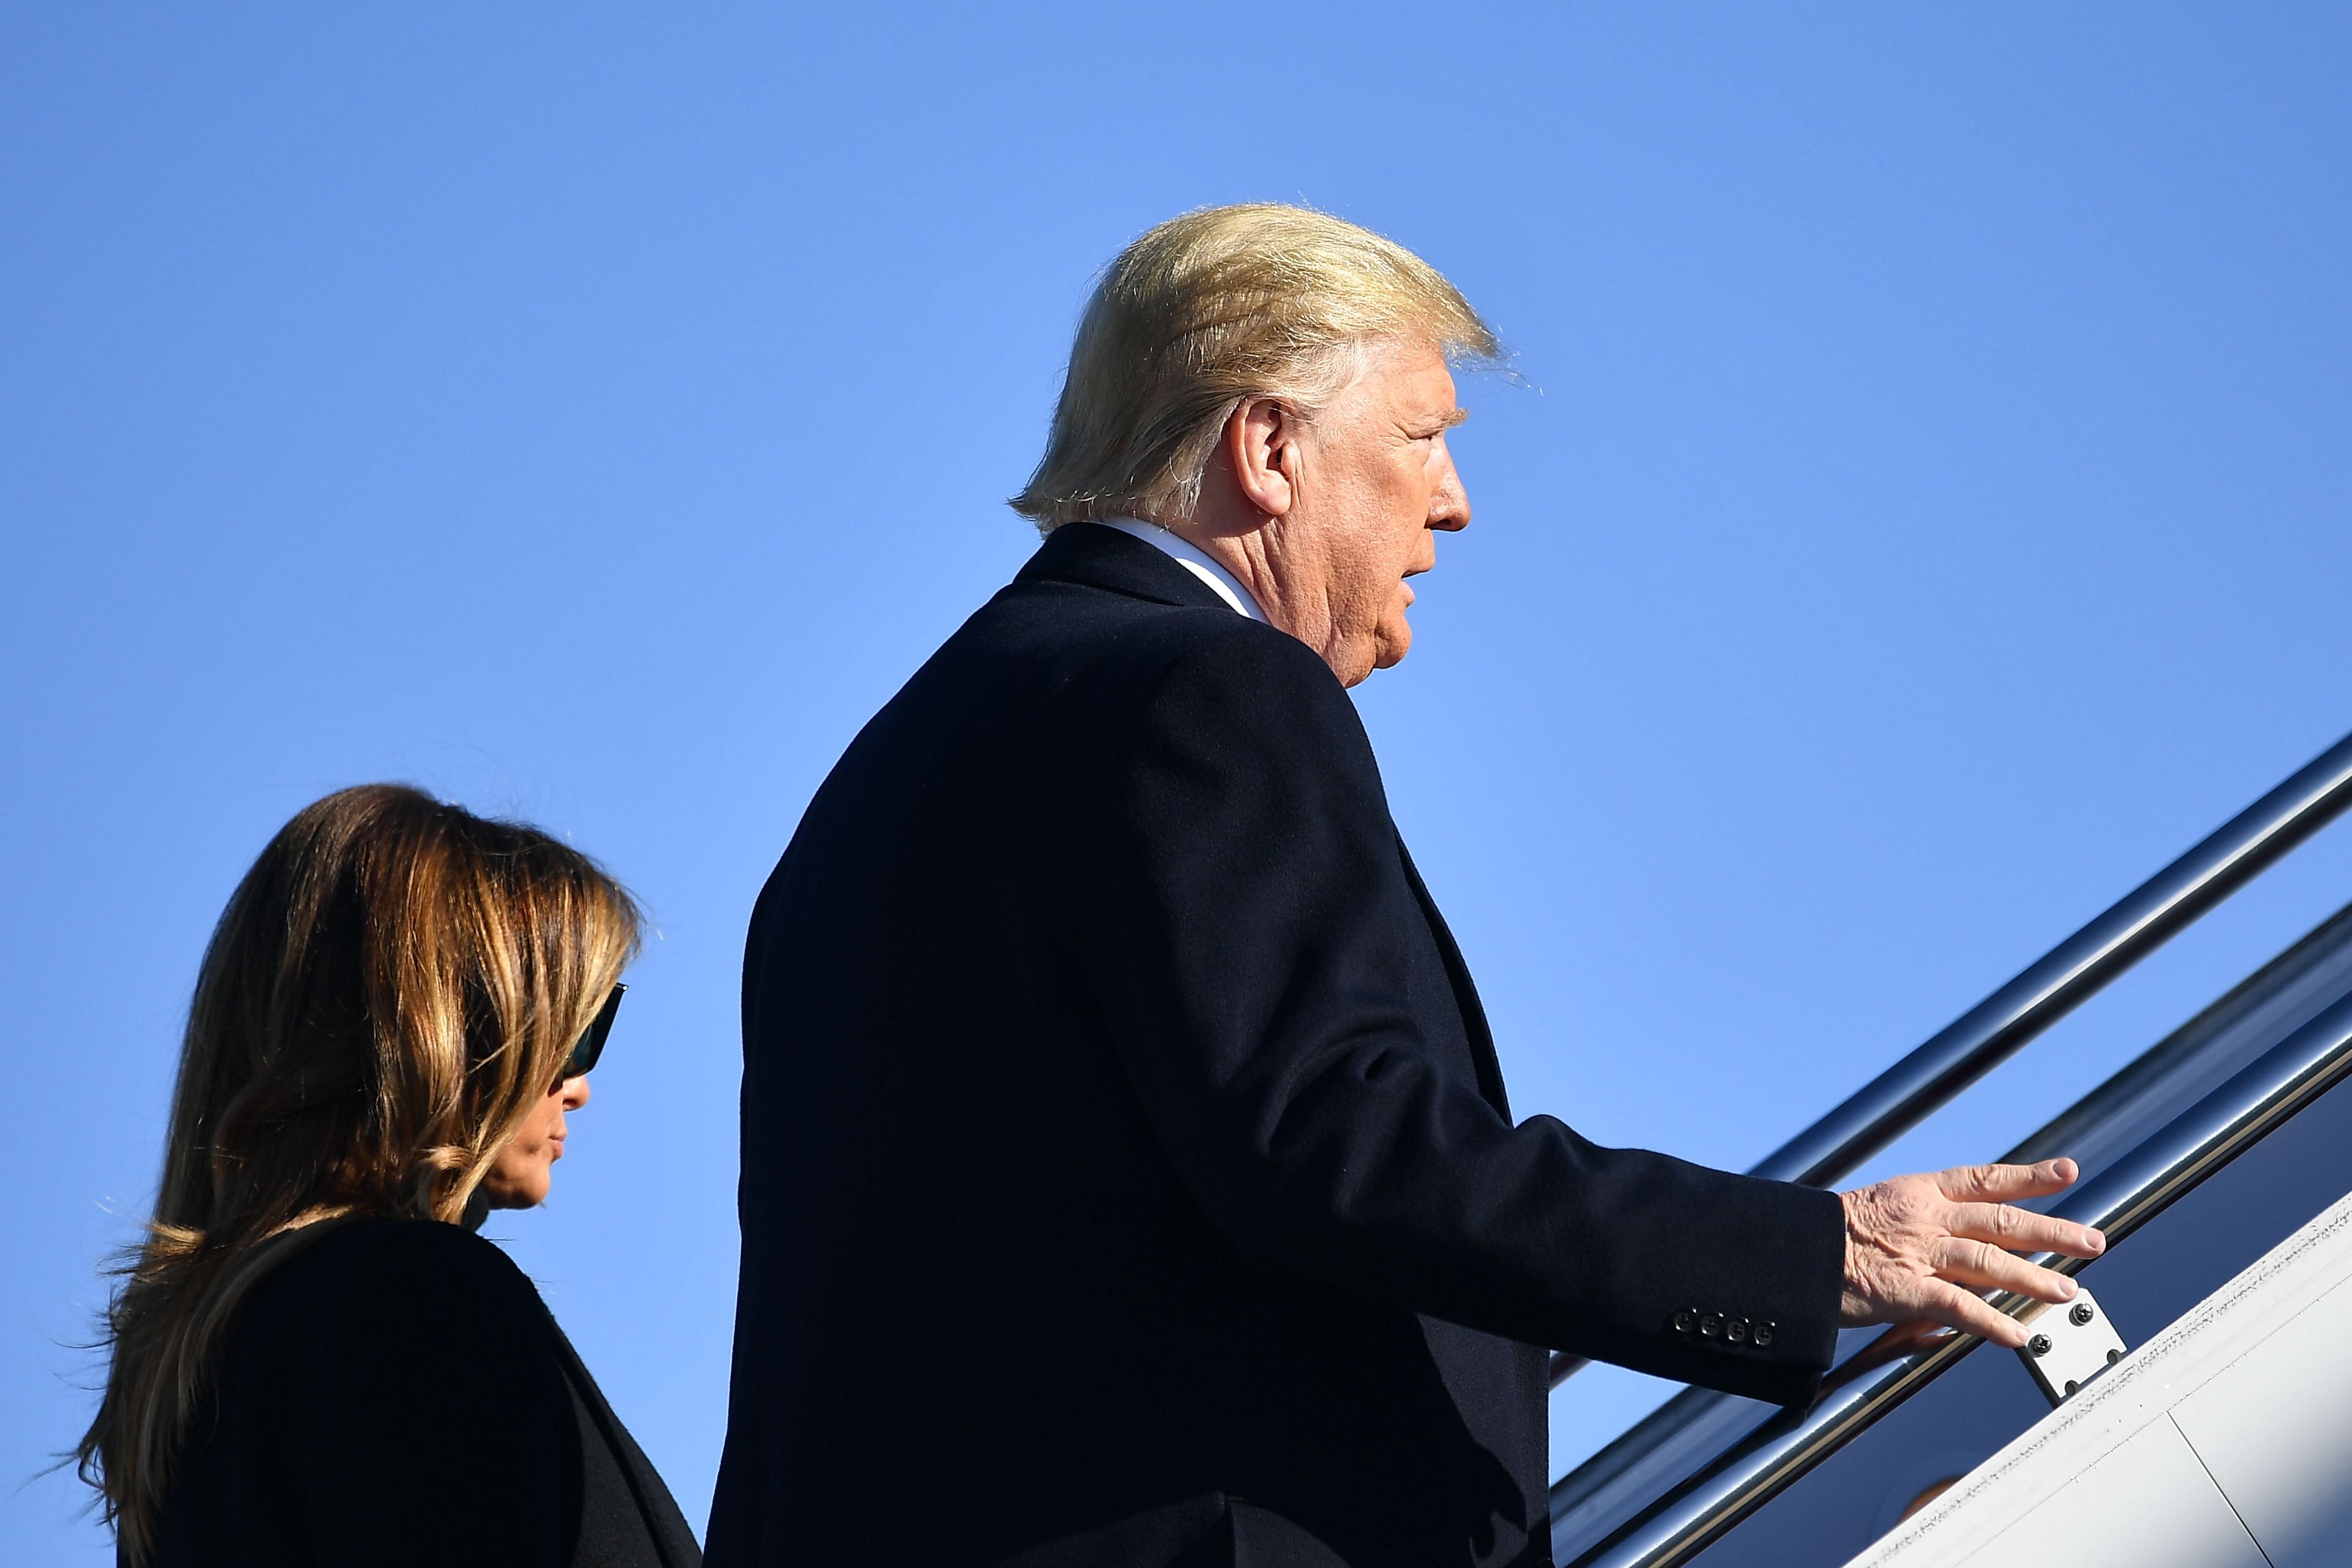 US President Donald Trump and First Lady Melania Trump make their way to board Air Force One before departing from Andrews Air Force Base in Maryland. (AFP Photo)